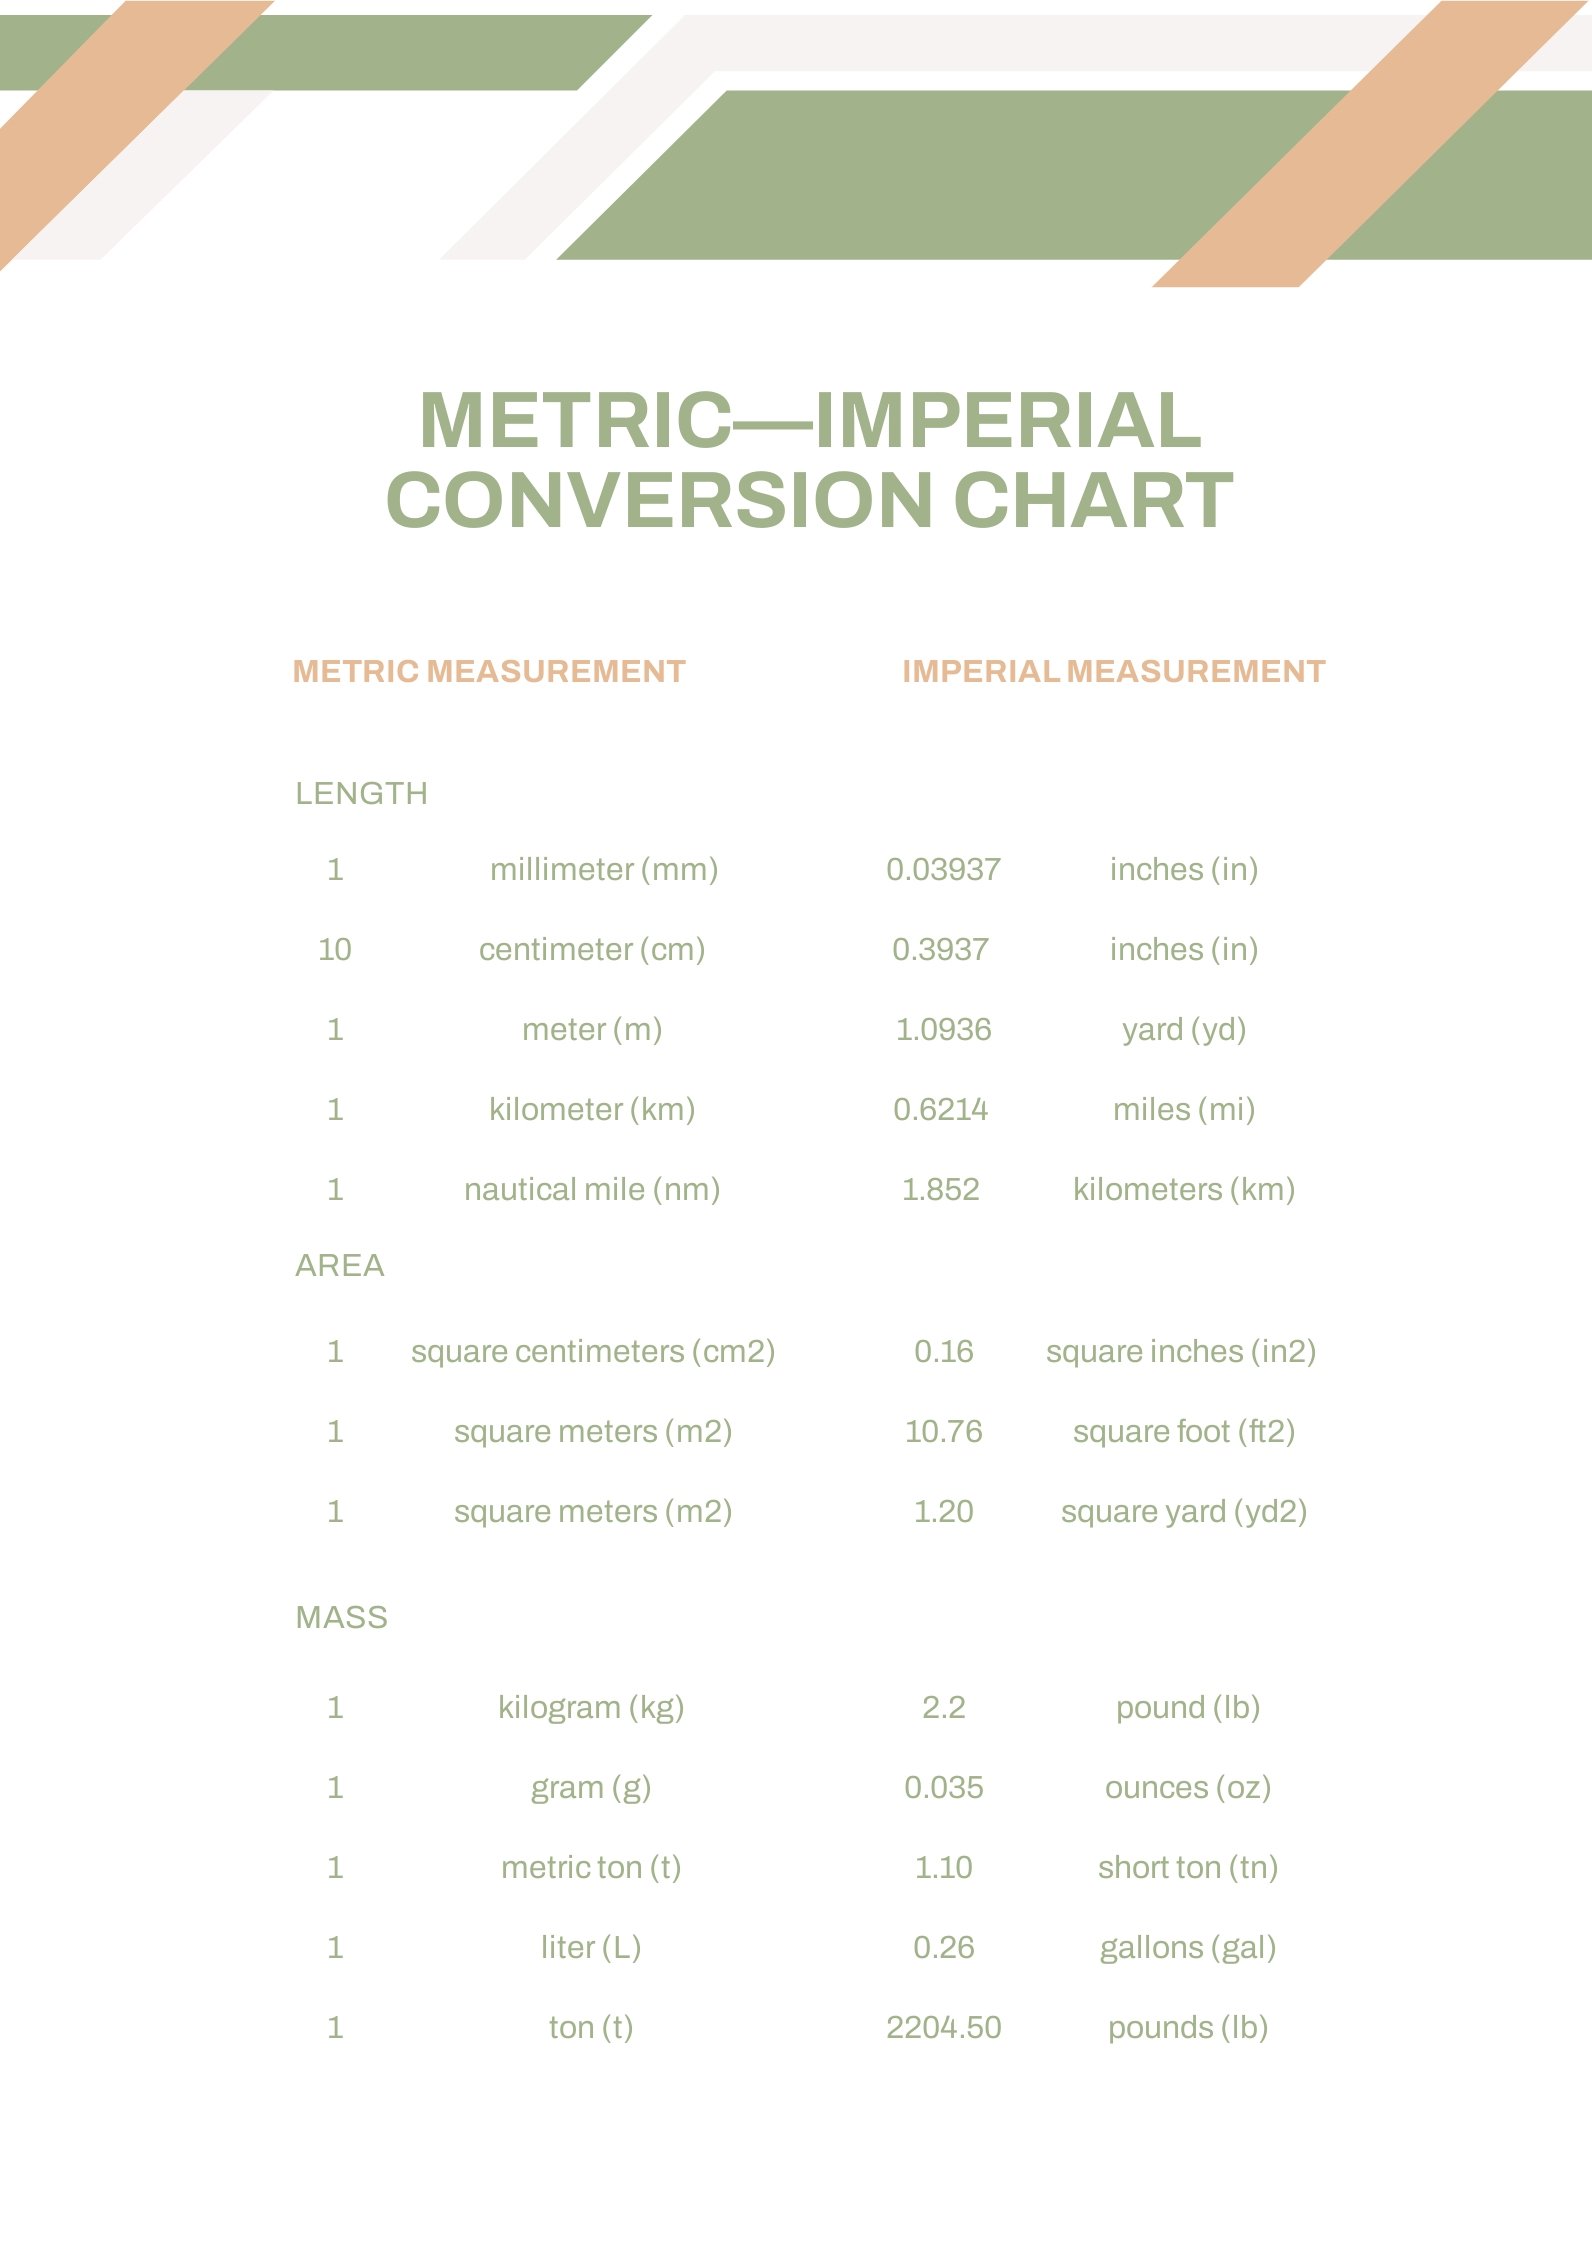 Metric to Imperial Conversion Chart in PDF - Download | Template.net